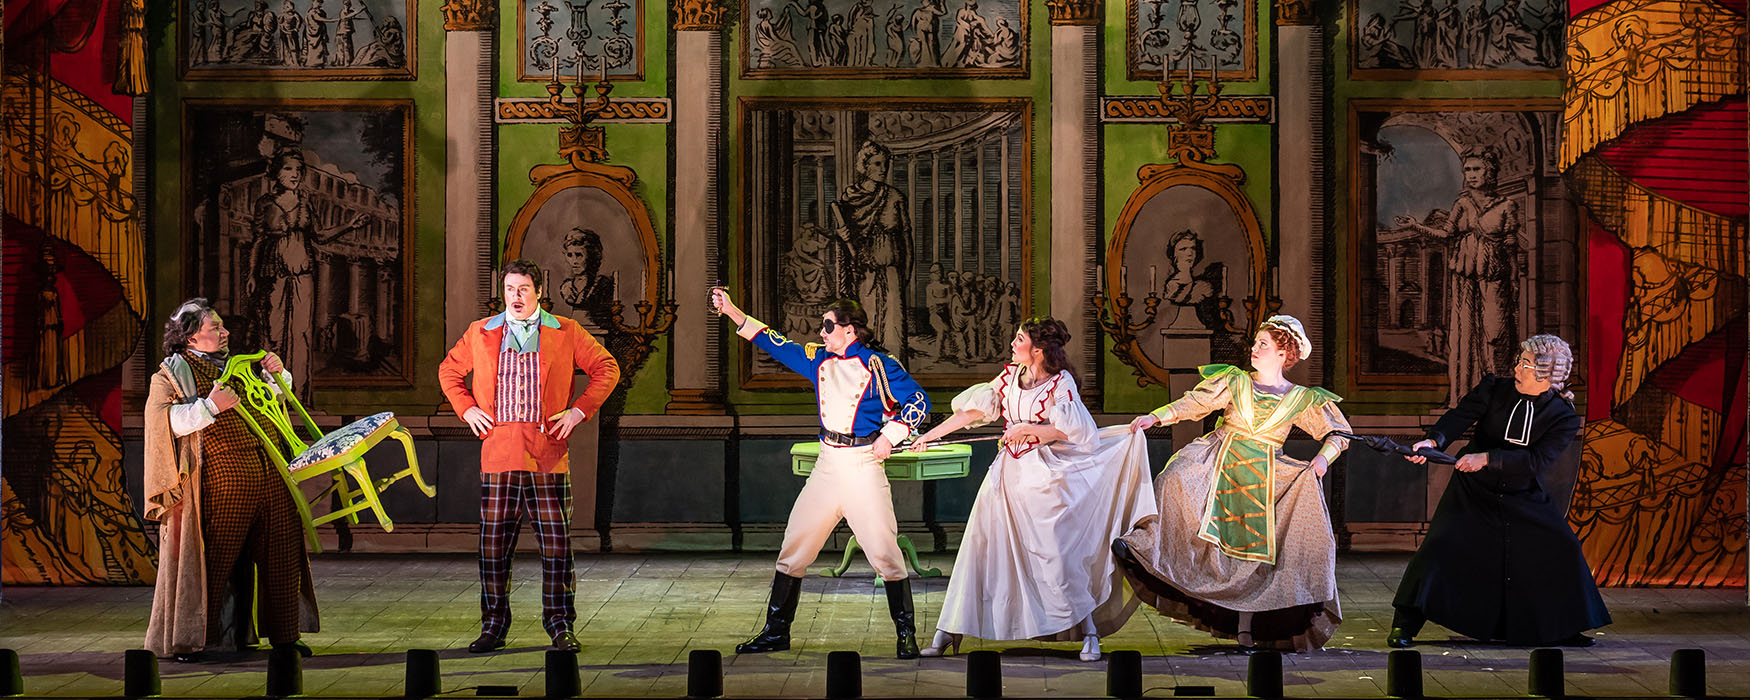 The Barber of Seville at The Dallas Opera